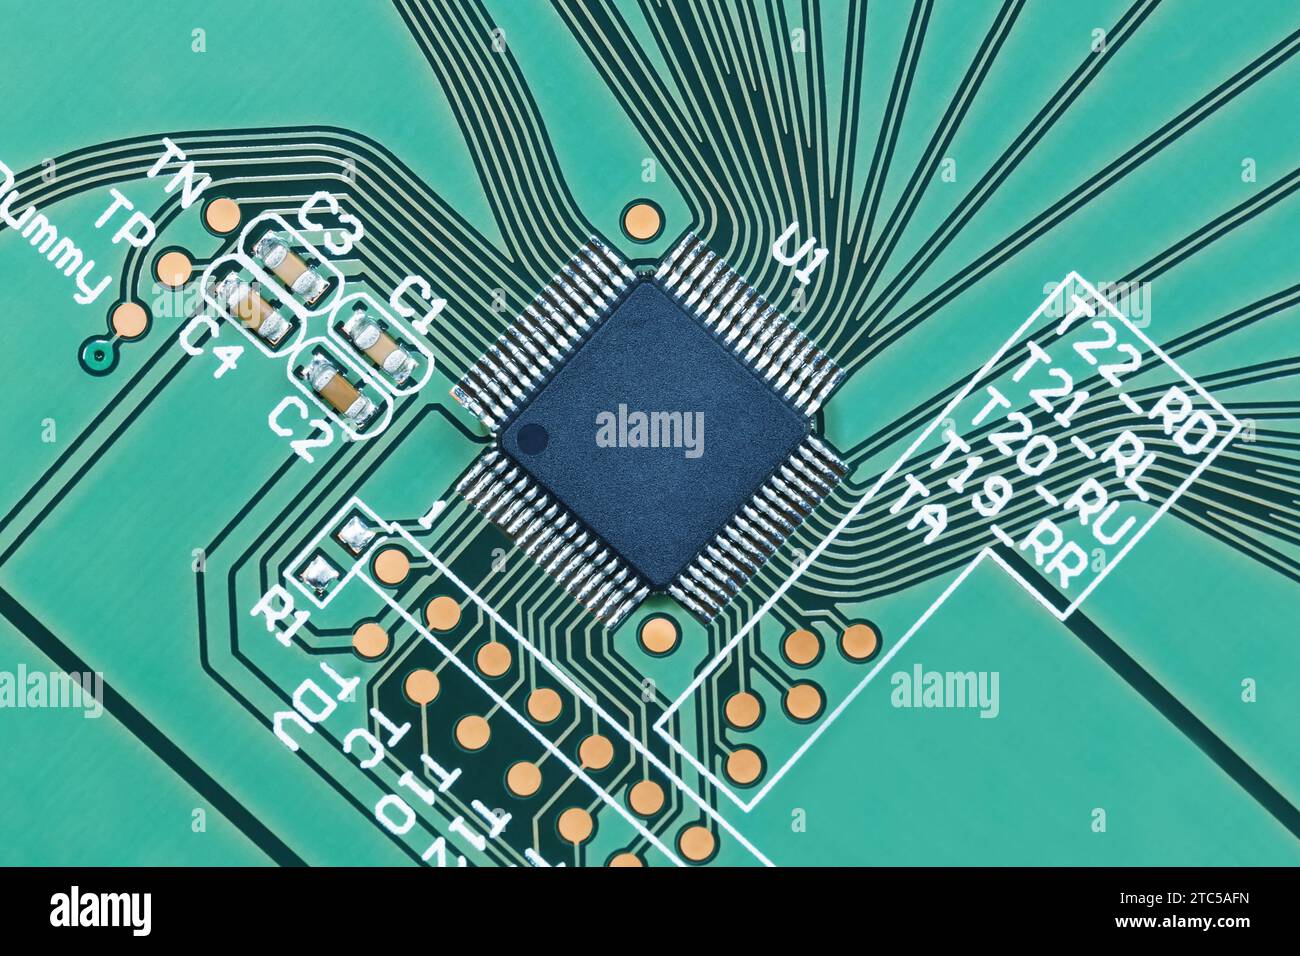 Microprocessor on a green printed circuit board close-up, top view. Macro photography Stock Photo